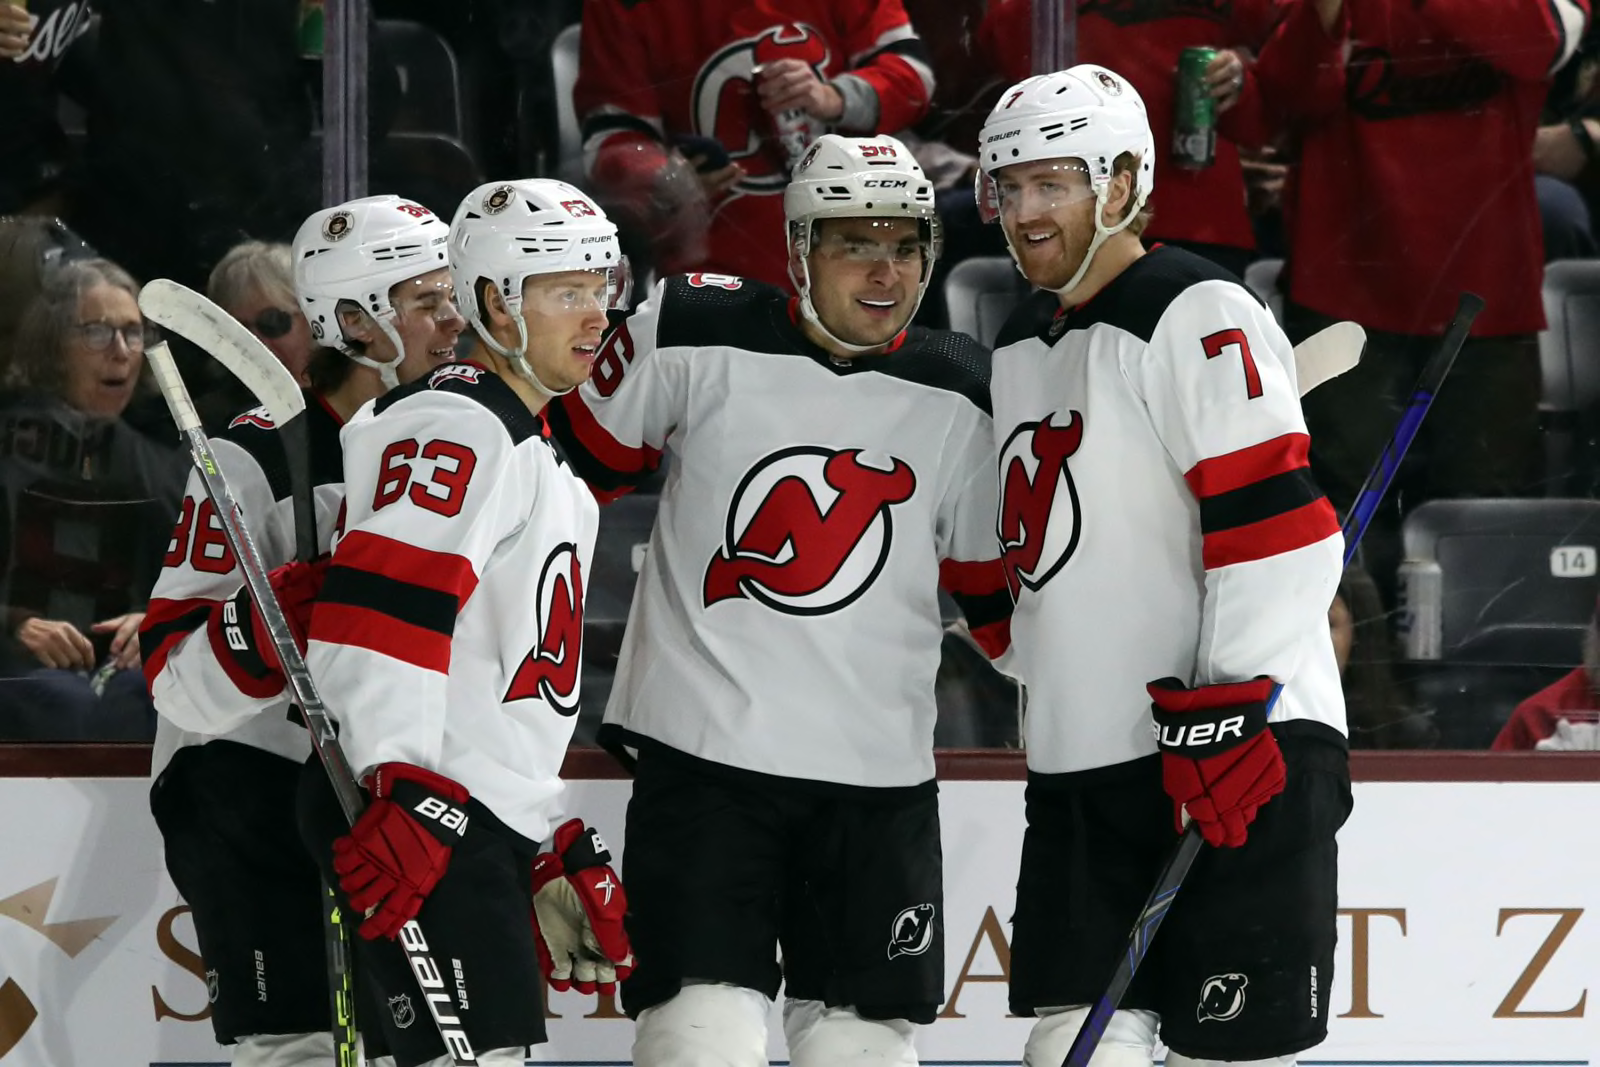 A Disappointing Game 1 Loss by New Jersey Devils to New York